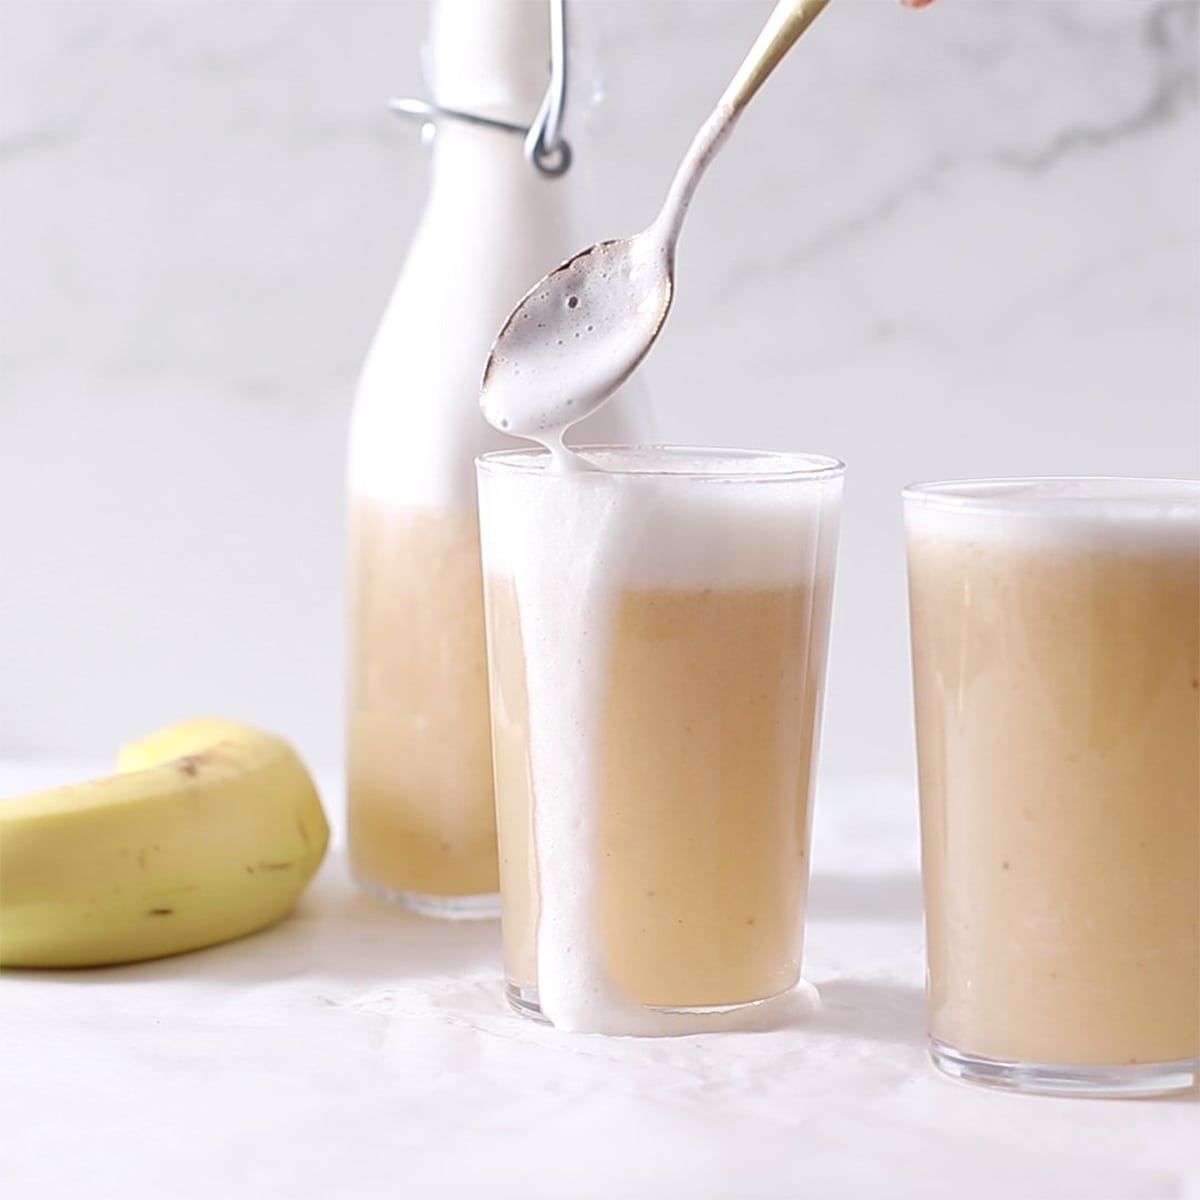 banana milk in a glass with foam top.